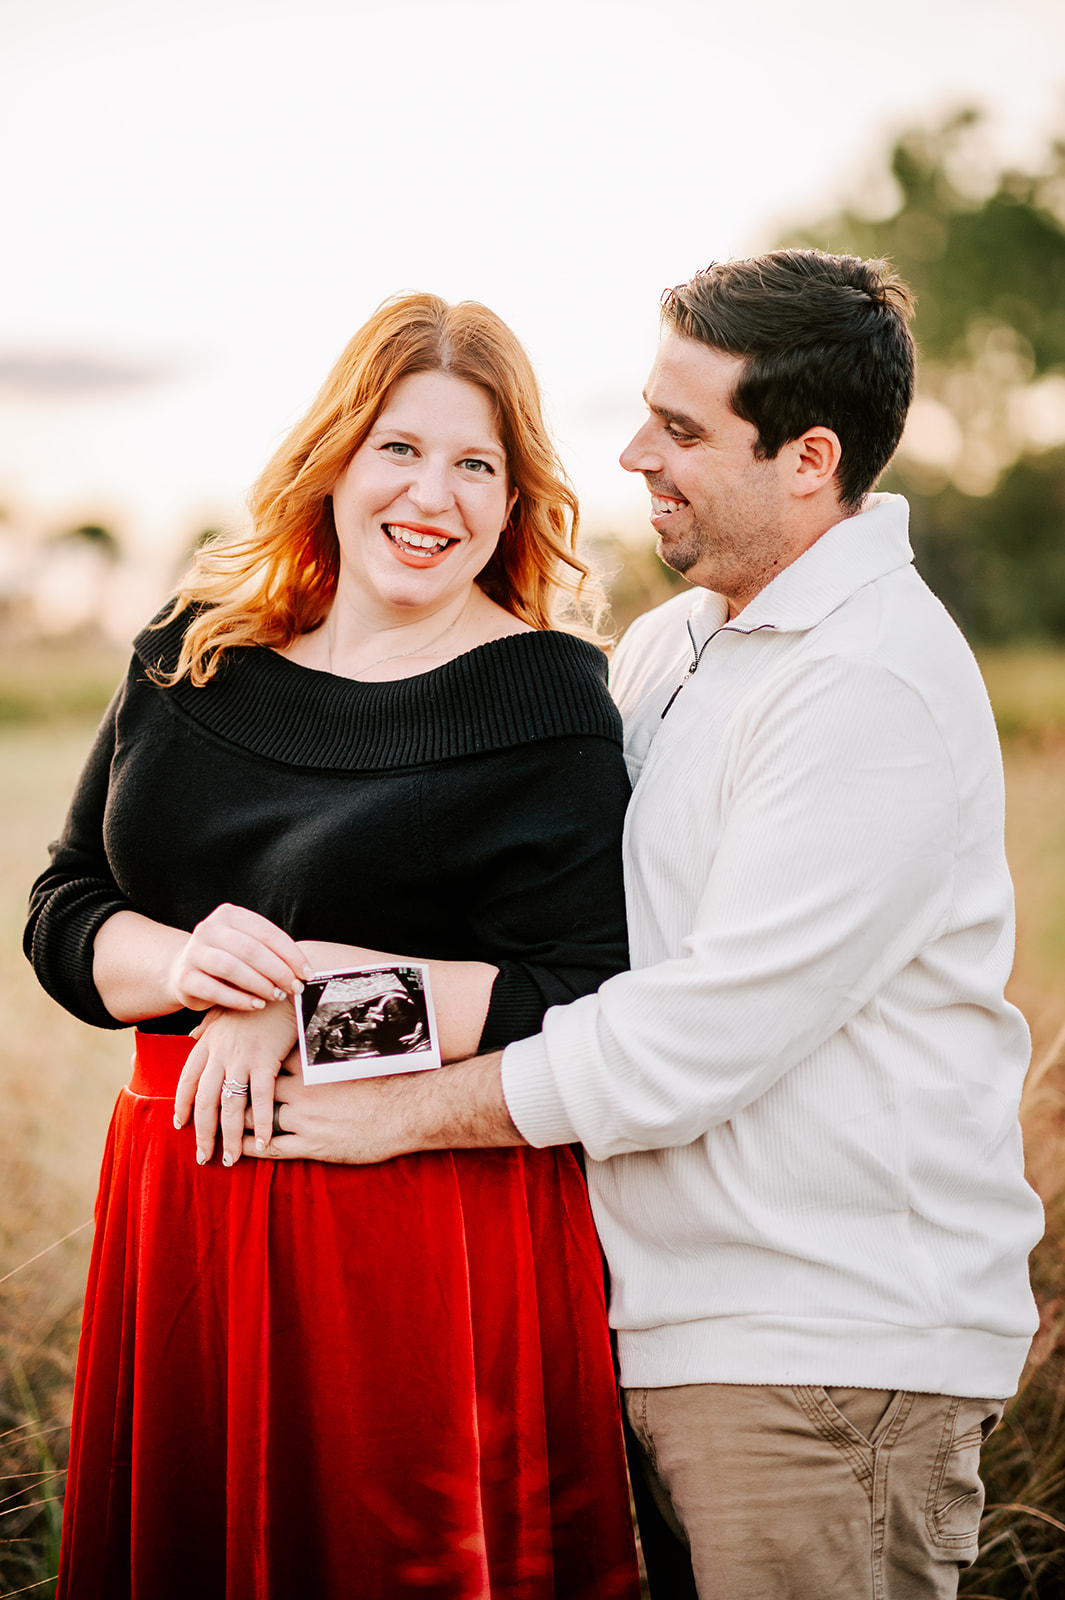 Expecting parents hug while standing in a field at sunset holding a sonogram after meeting Journey of Motherhood